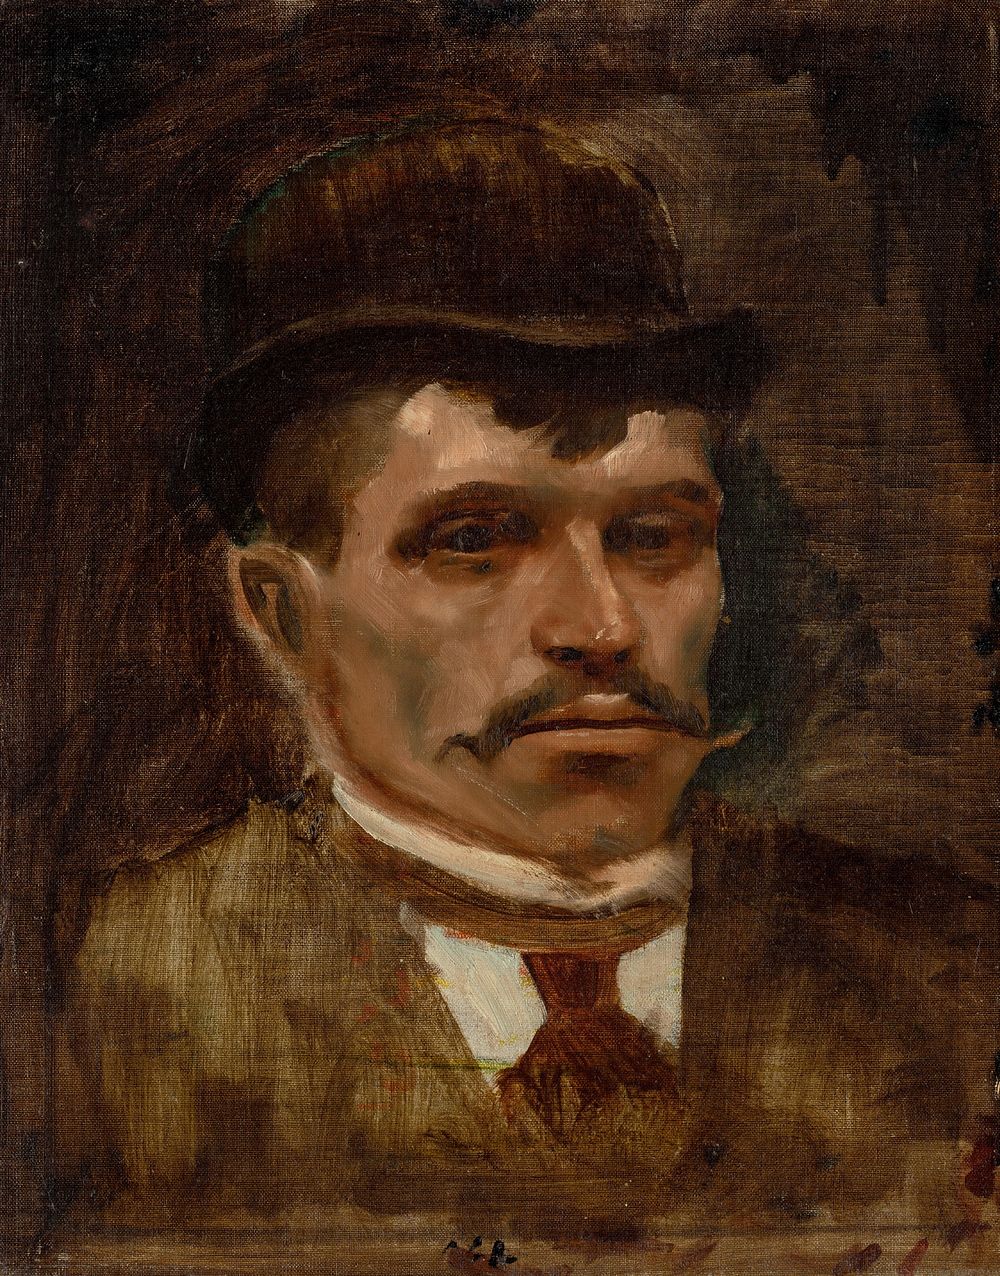 Coachman in a hat with a fringe by Ladislav Mednyánszky